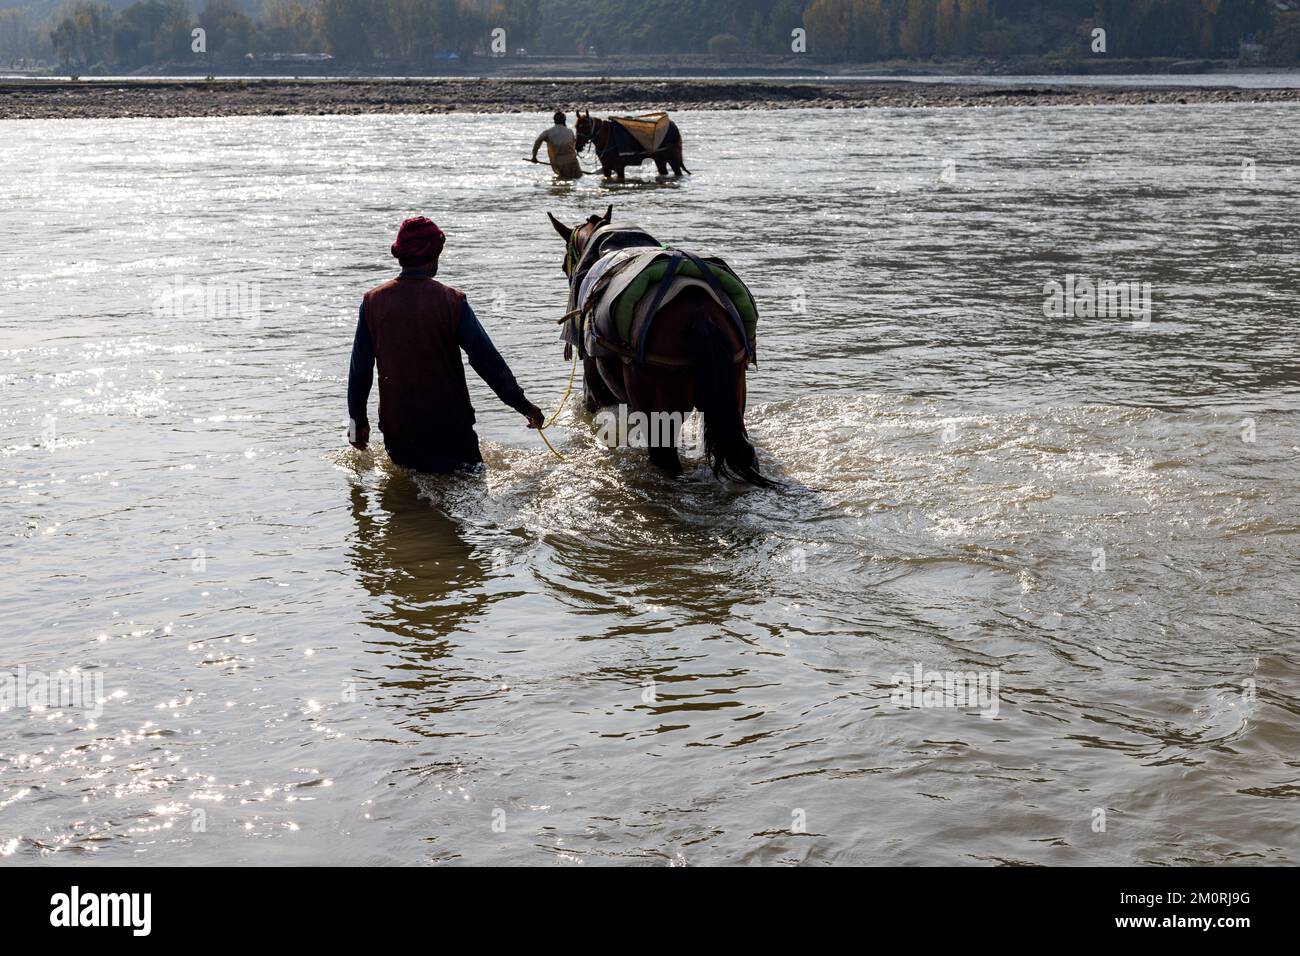 walking behind his horse in the river water to bring construction sand from the river. Silhouette of a man waking with his horse in the river early in Stock Photo